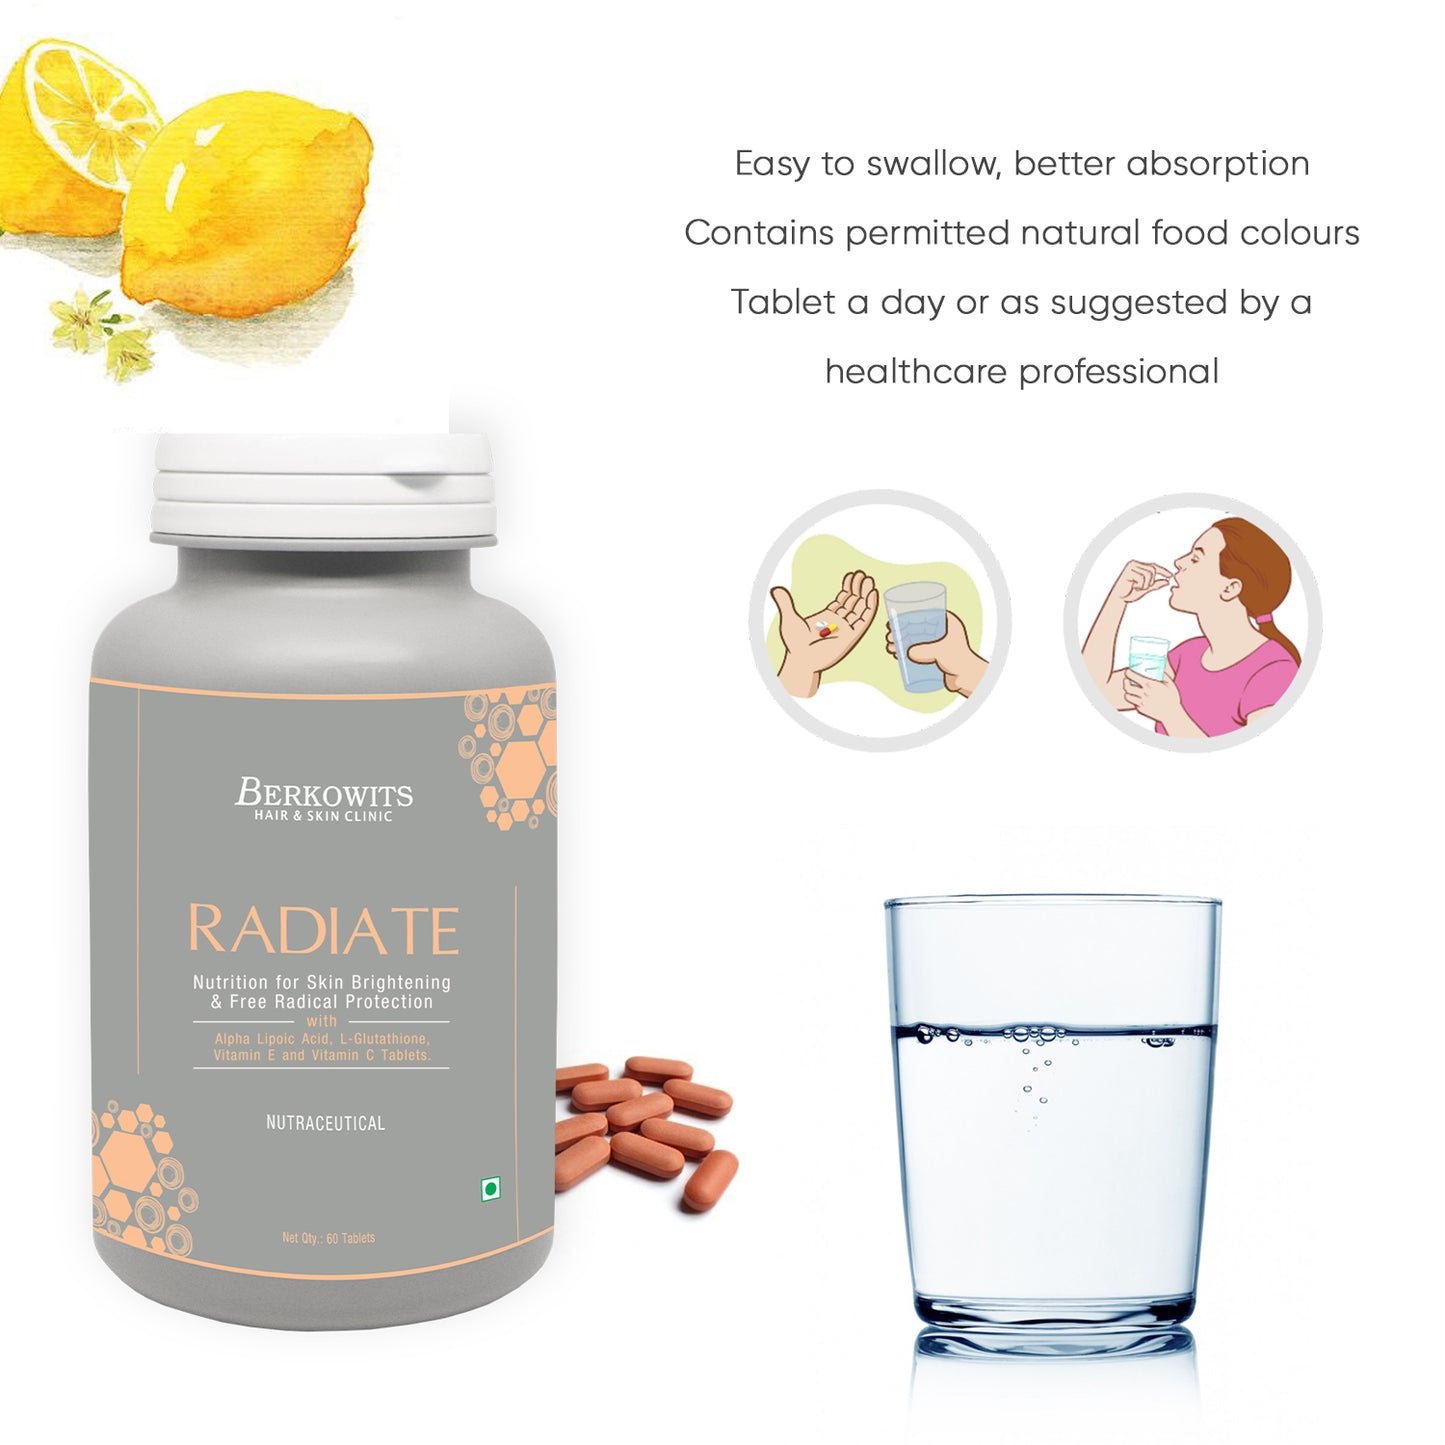 Berkowits Radiate L Glutathione 600mg Nutrition For Glowing and Healthy Skin with Vitamin C, E and Alpha Lipoic Acid- 60 Servings